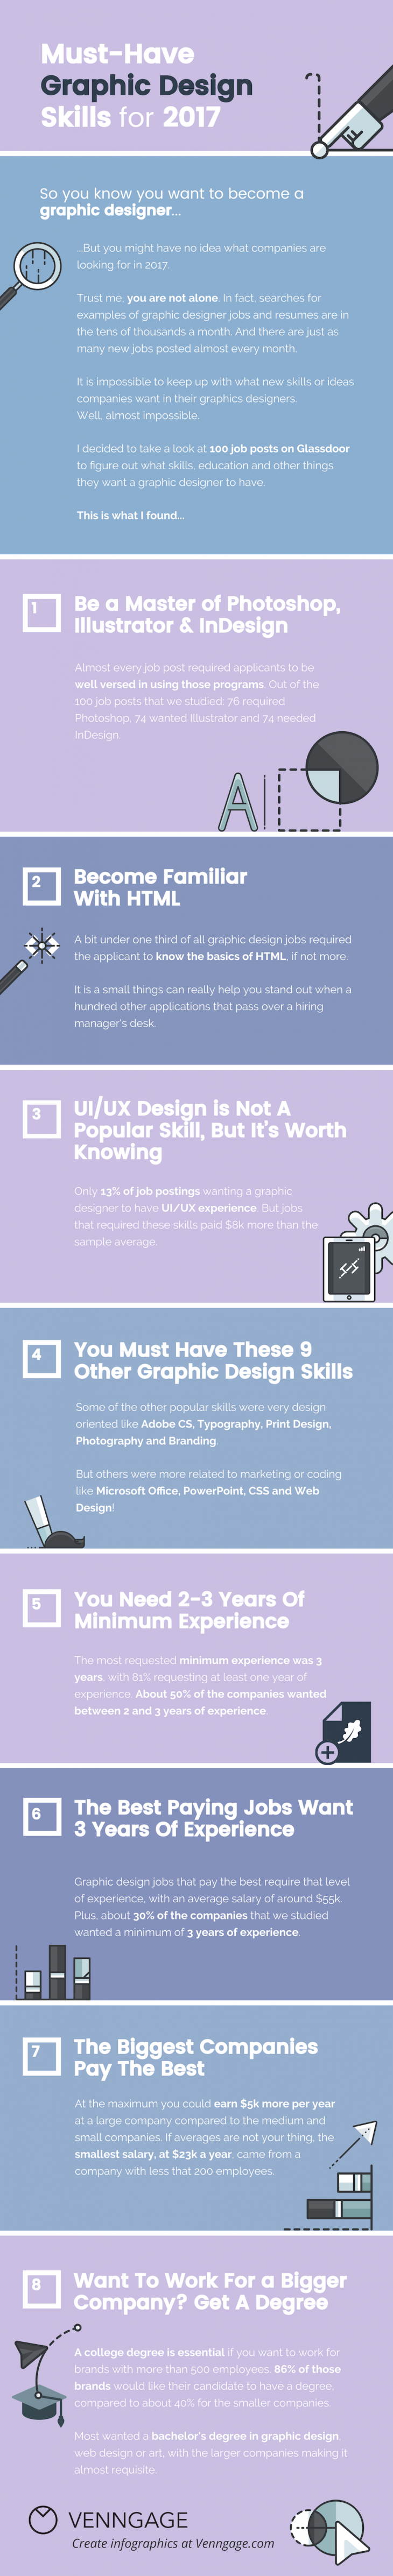 Must-Have Graphic Design Skills For 2017 - #Infographic